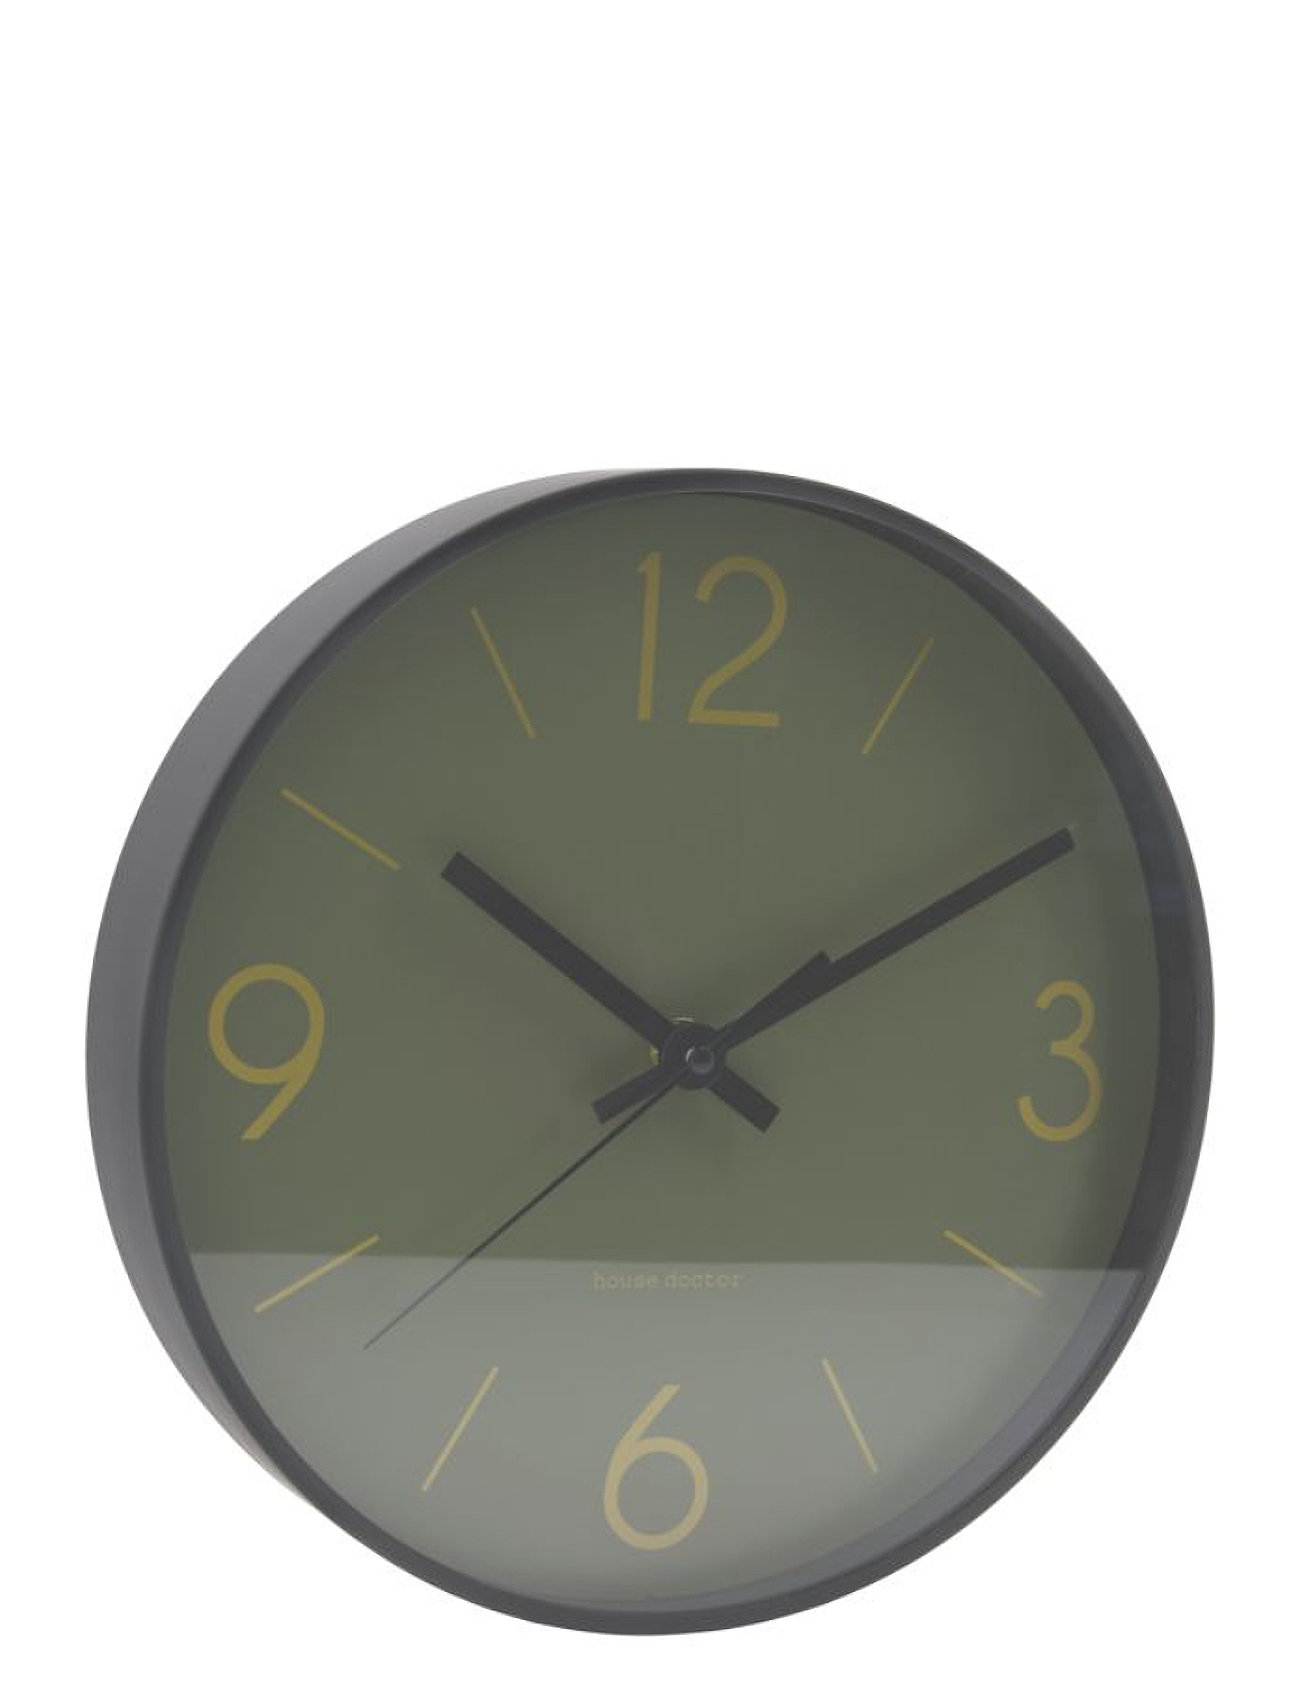 Wall Clock, Hdtime, Dark Green Home Decoration Watches Wall Clocks Green House Doctor